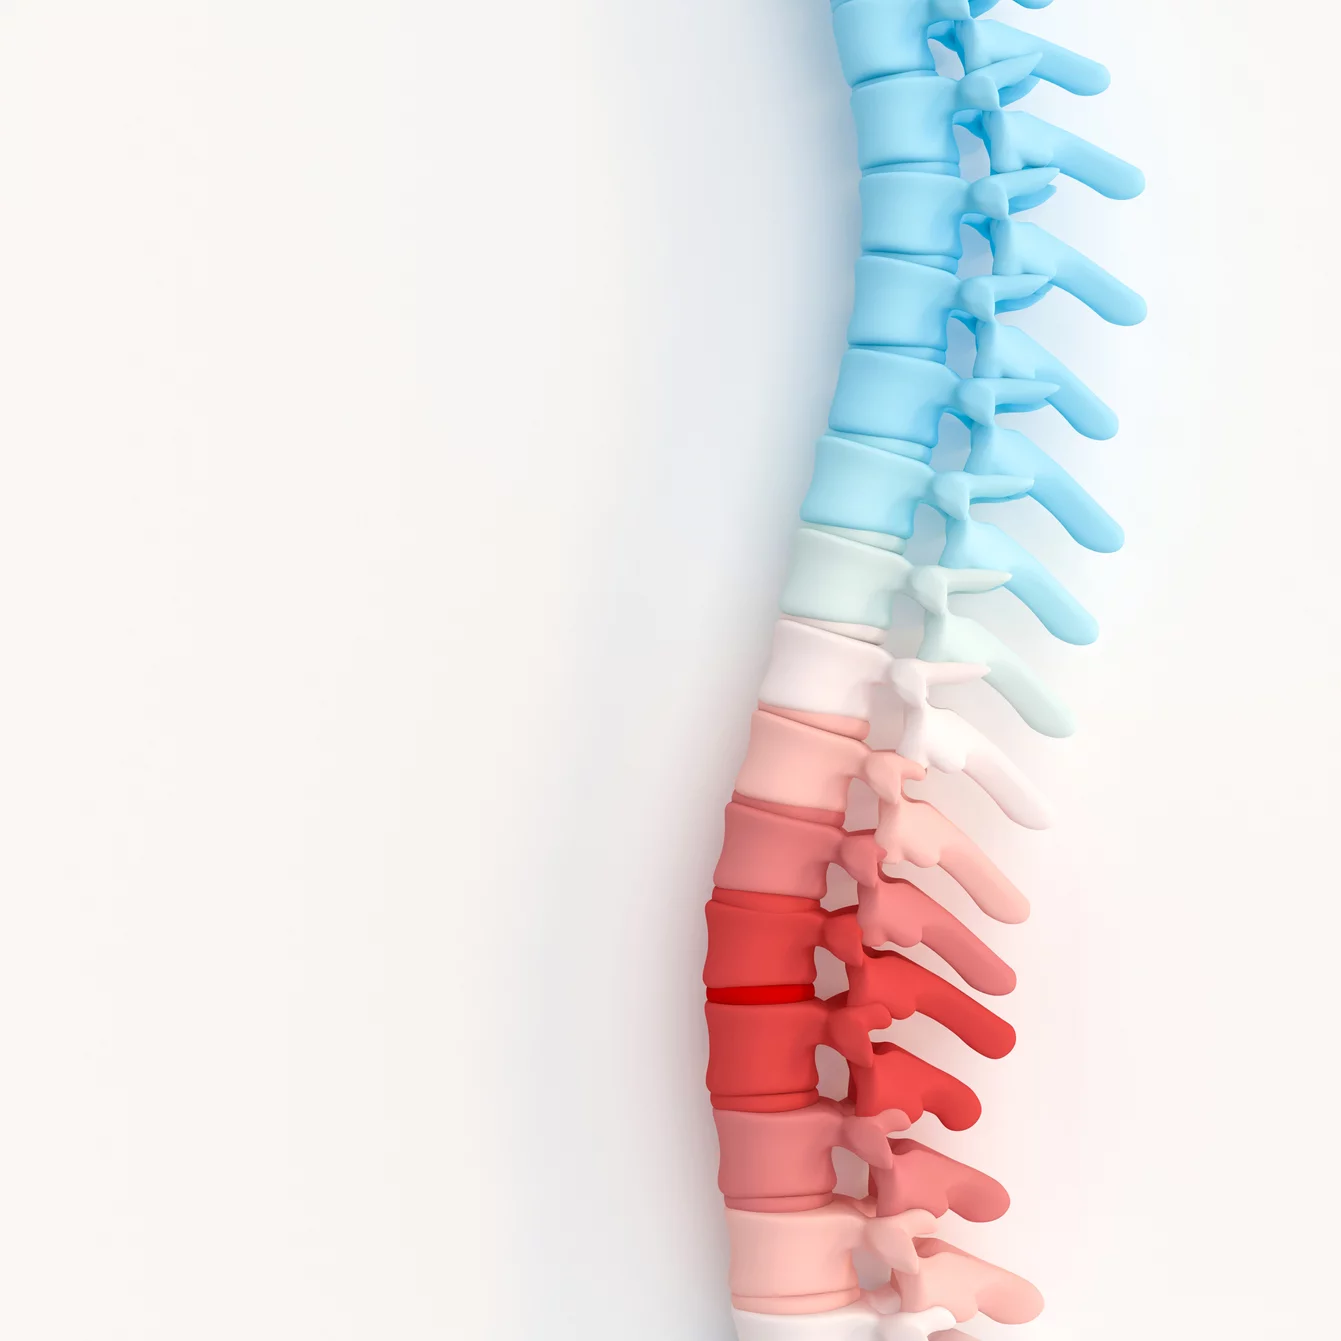 Dermatome Chart 101: Understanding Spinal Nerves and Locations - Pain Management & Injury Relief